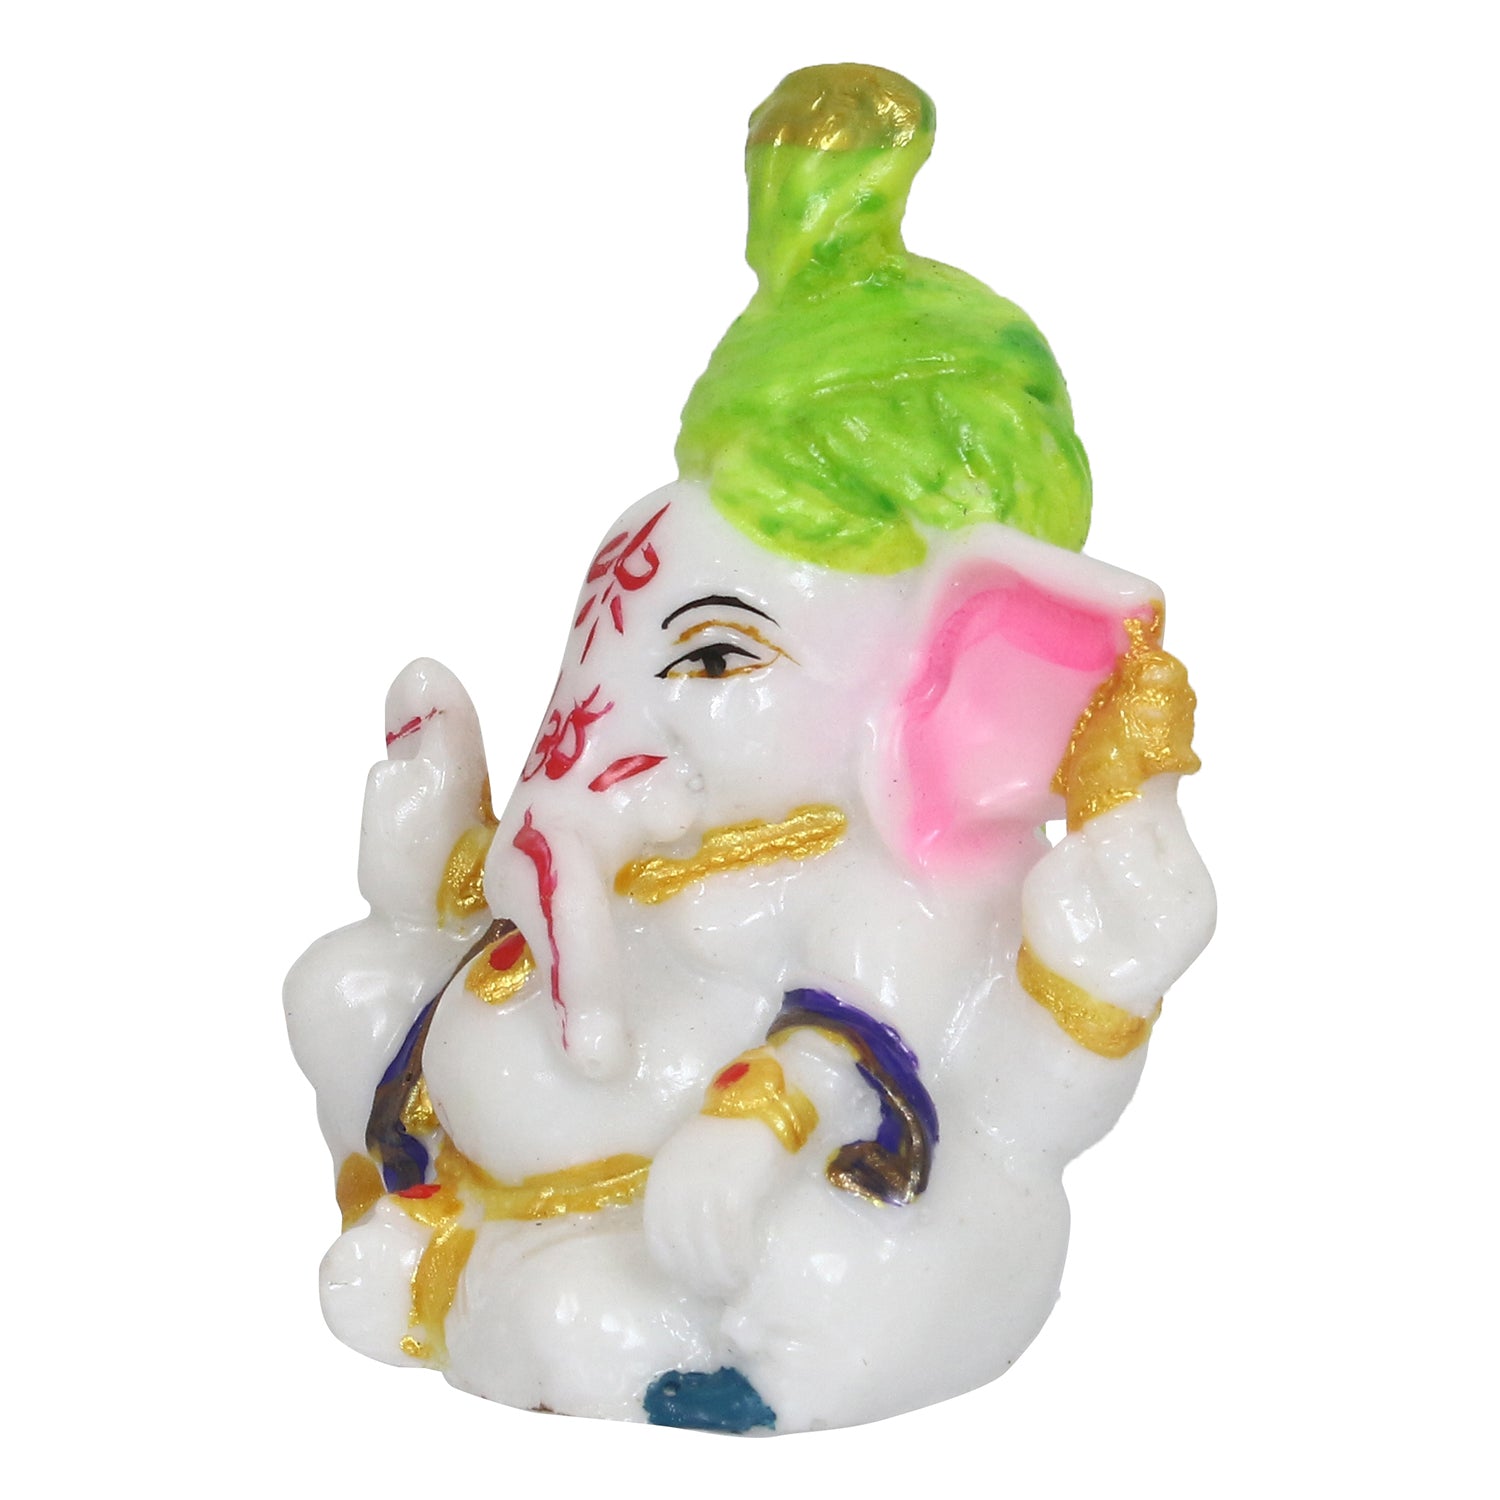 Decorative Lord Ganesha Idol For Car Dashboard, Home Temple, And Office Desks 5